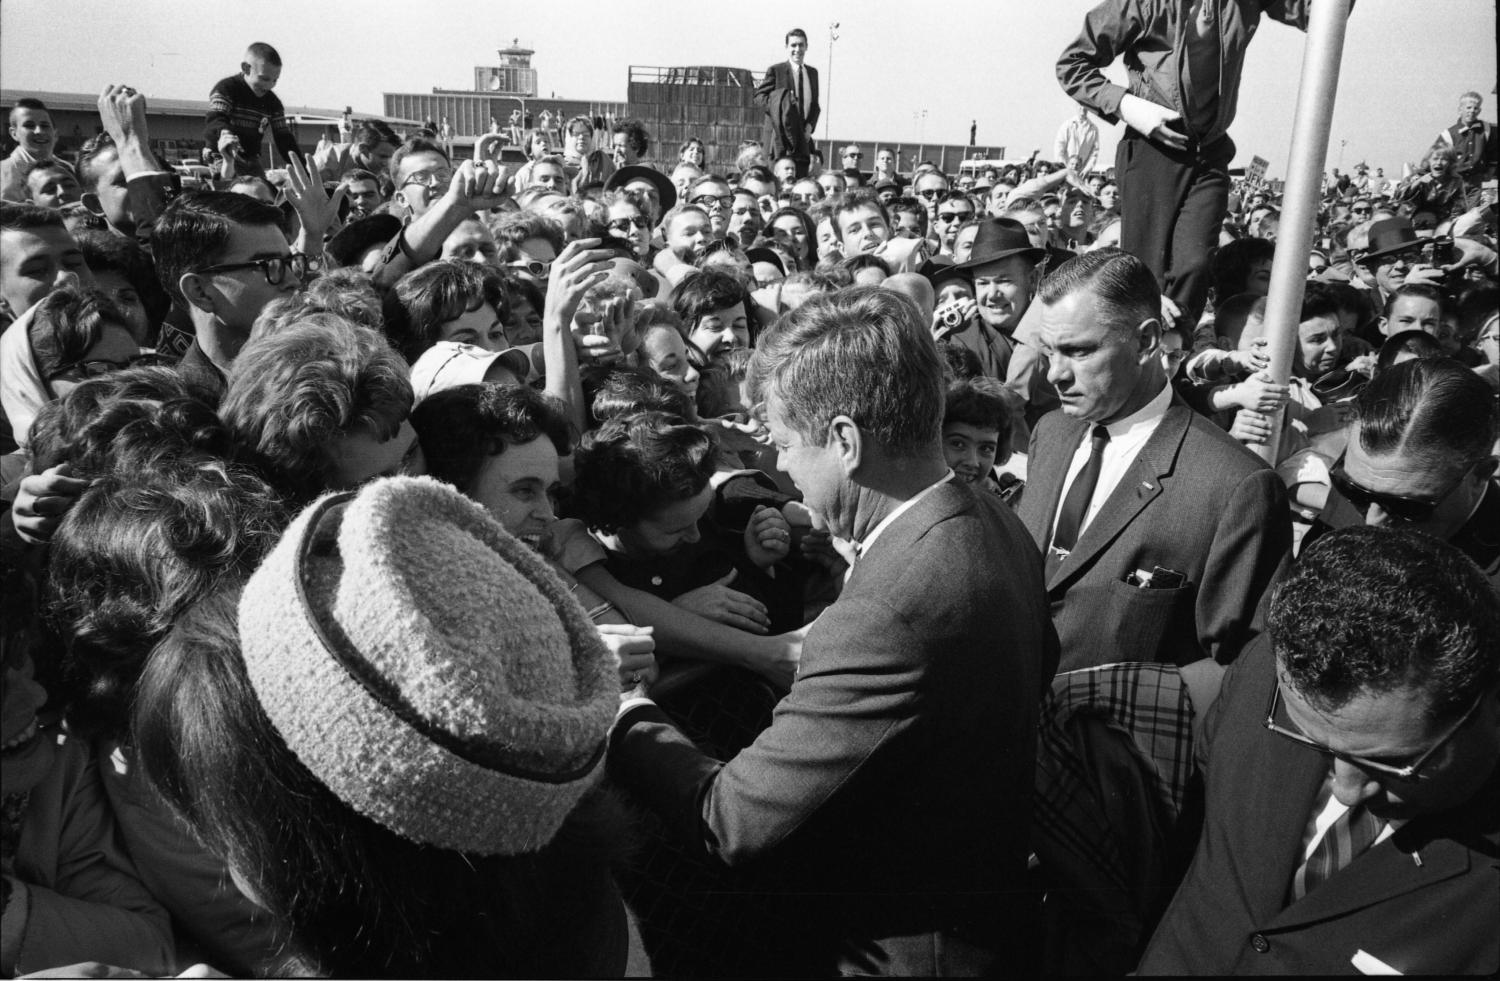 [The Kennedys greeting the crowd at Love Field]
                                                
                                                    [Sequence #]: 1 of 1
                                                